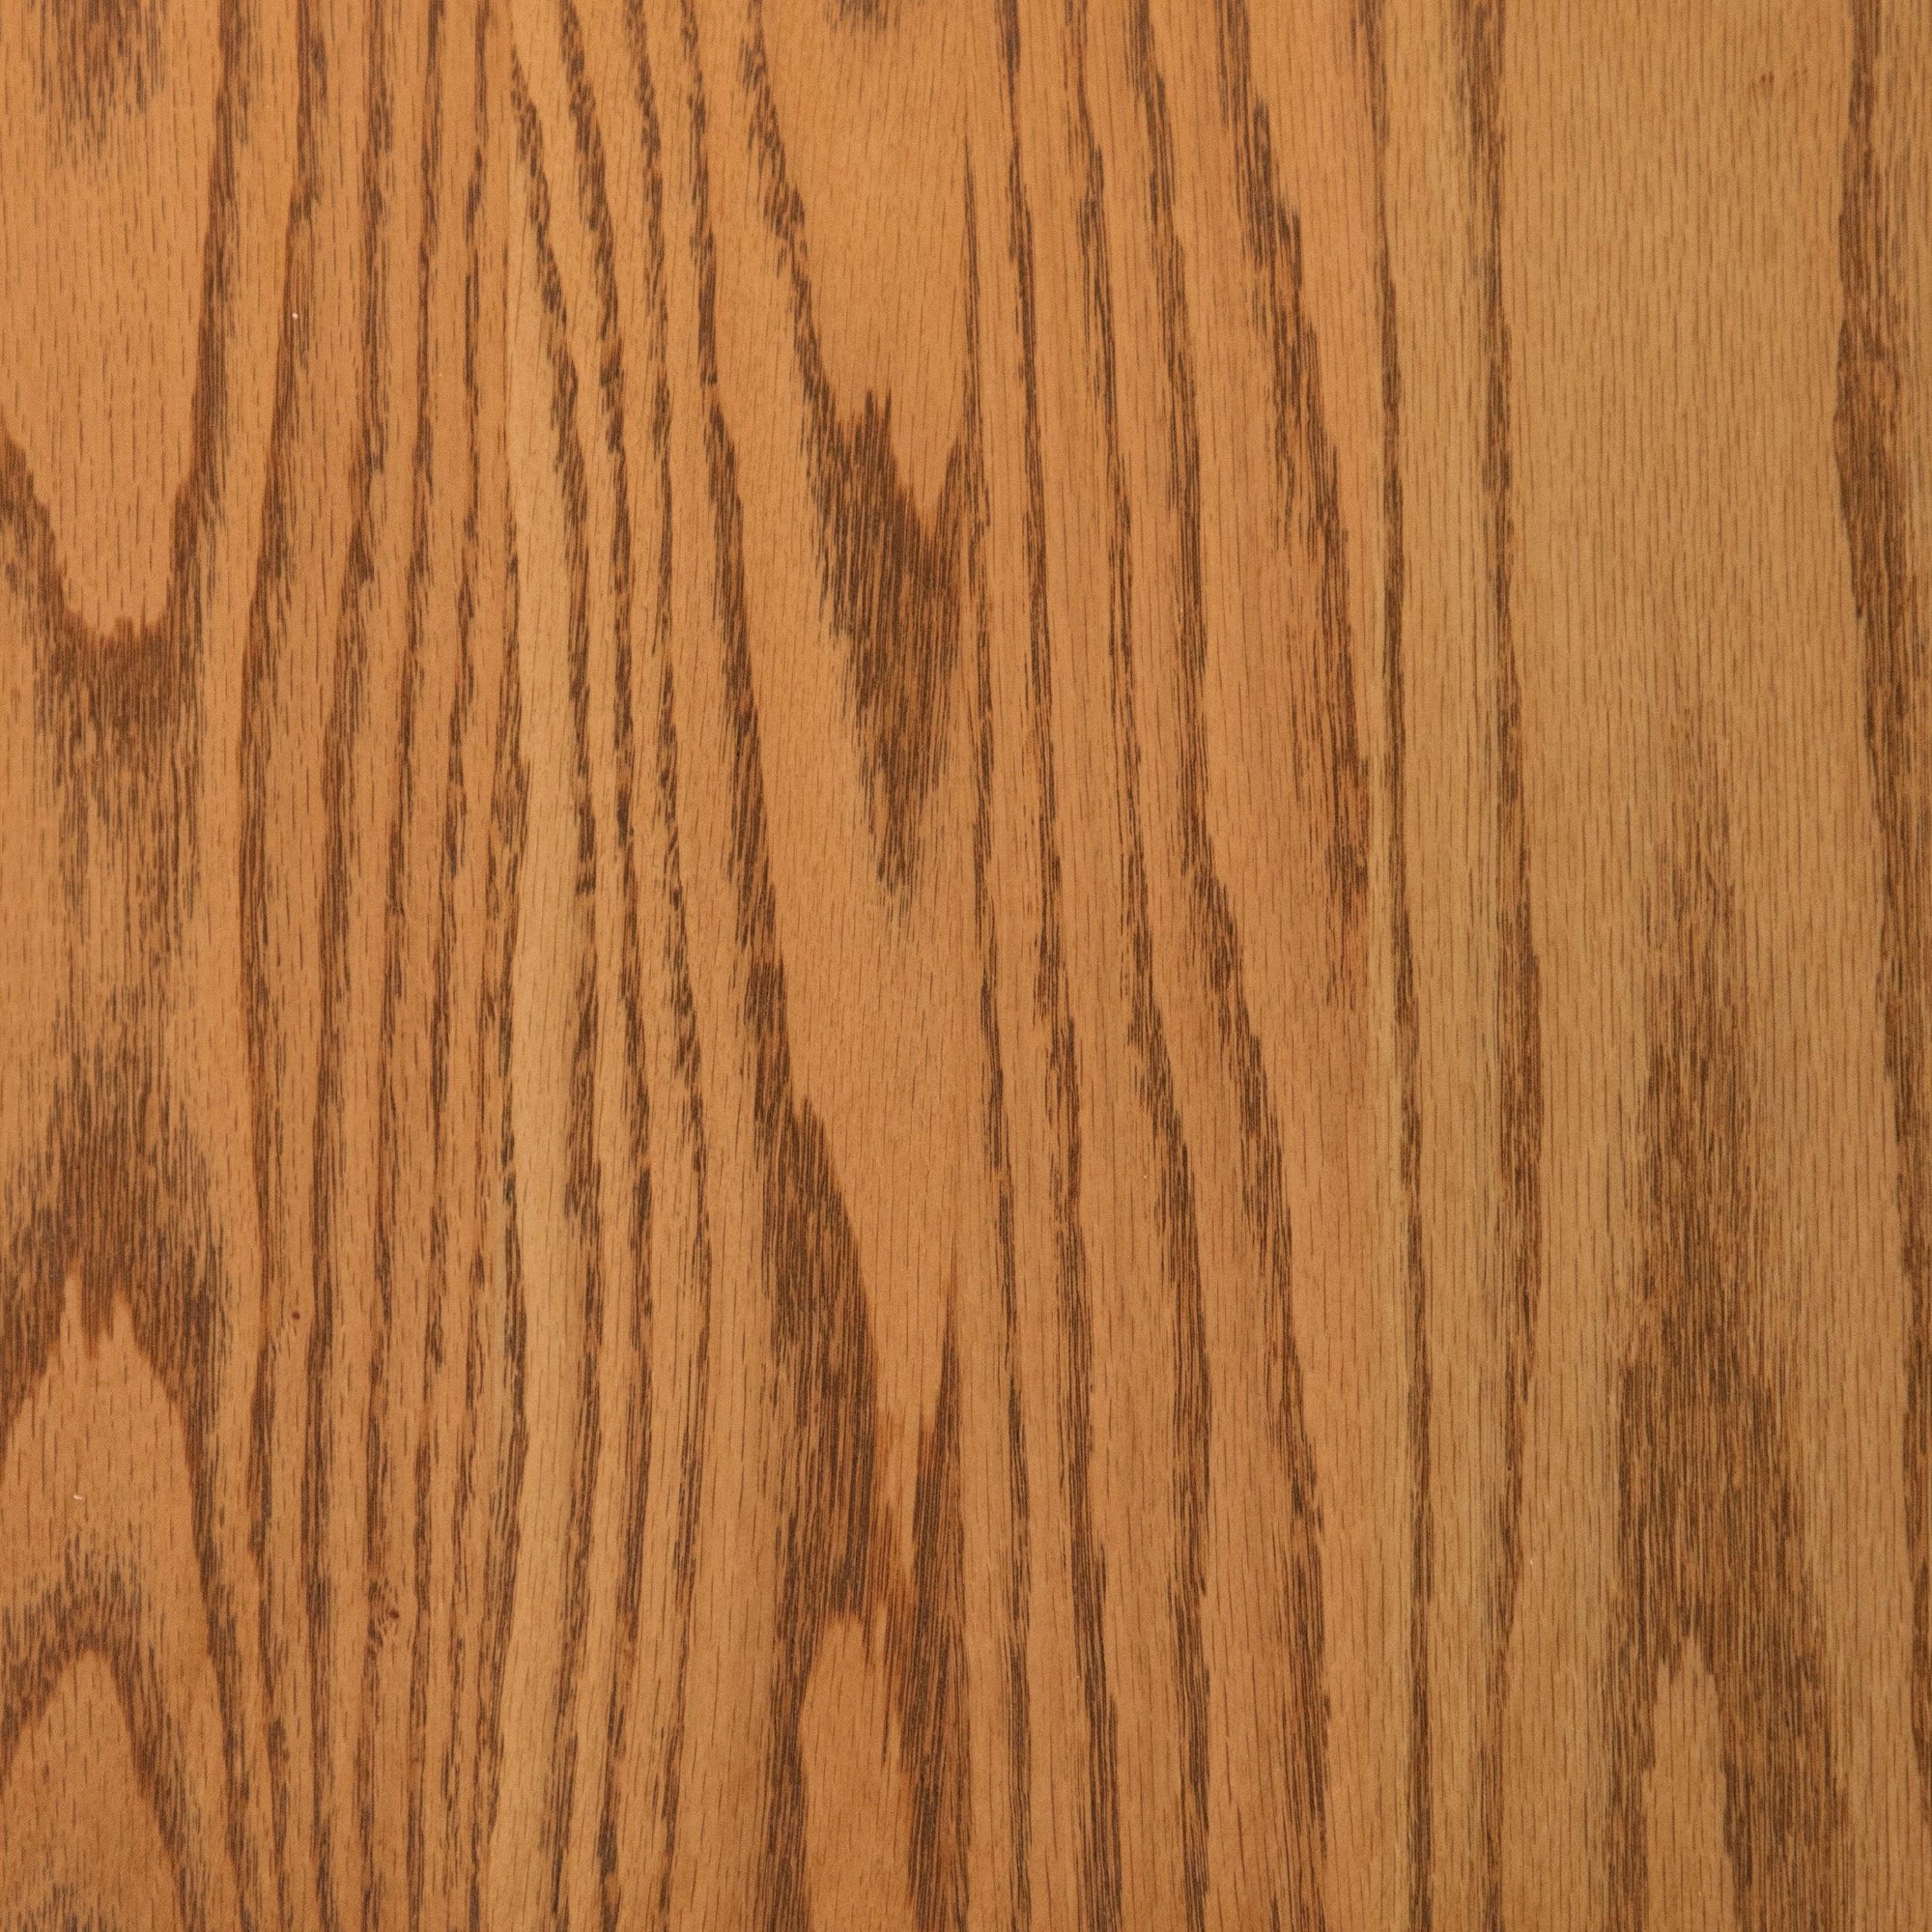 Blonde Stained Red Oak - ROMI DESIGN